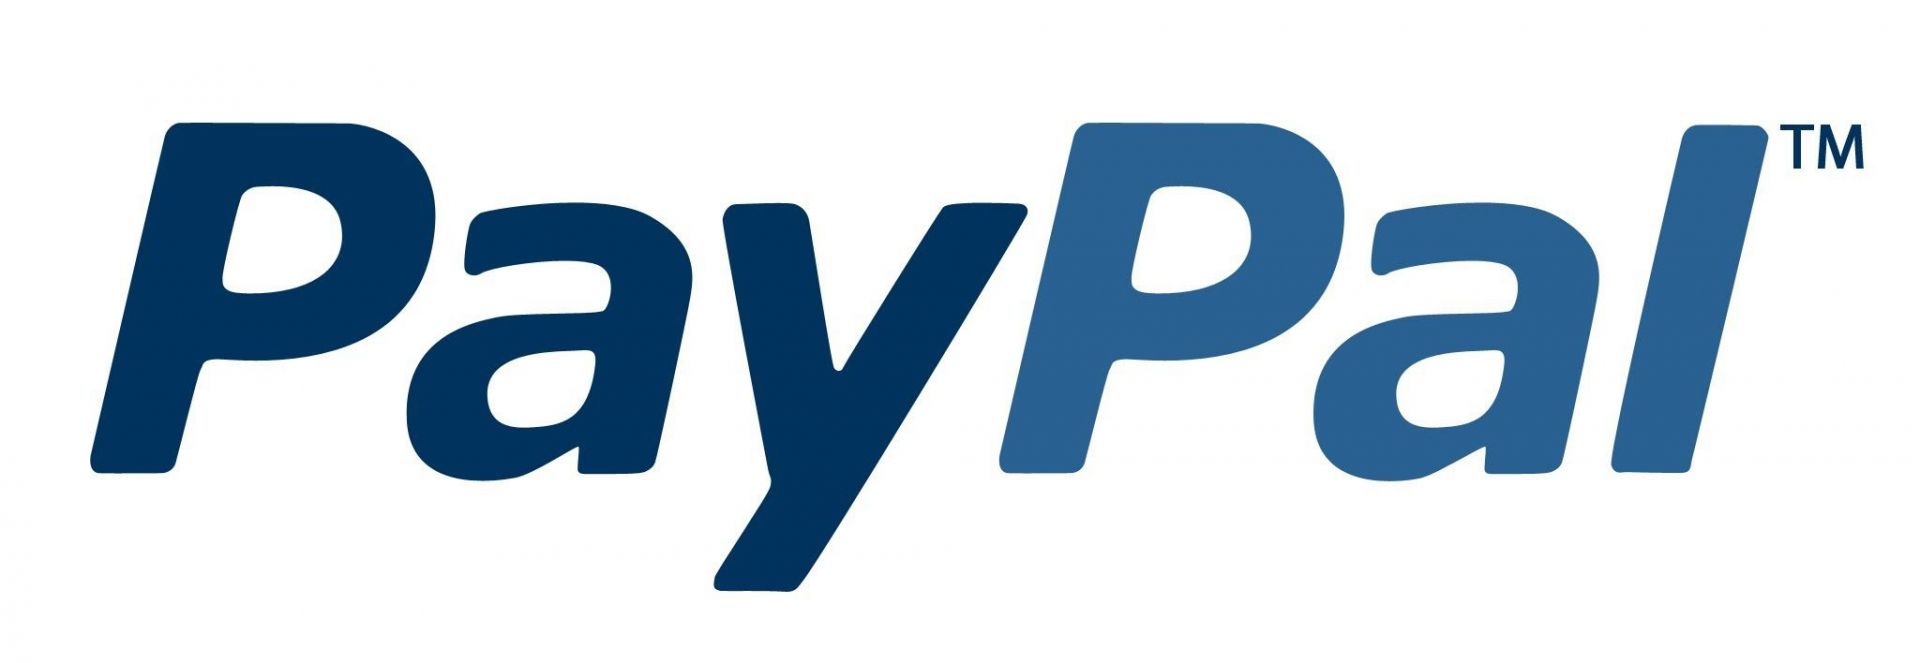 Logo paiement Paypal Annick Abrial